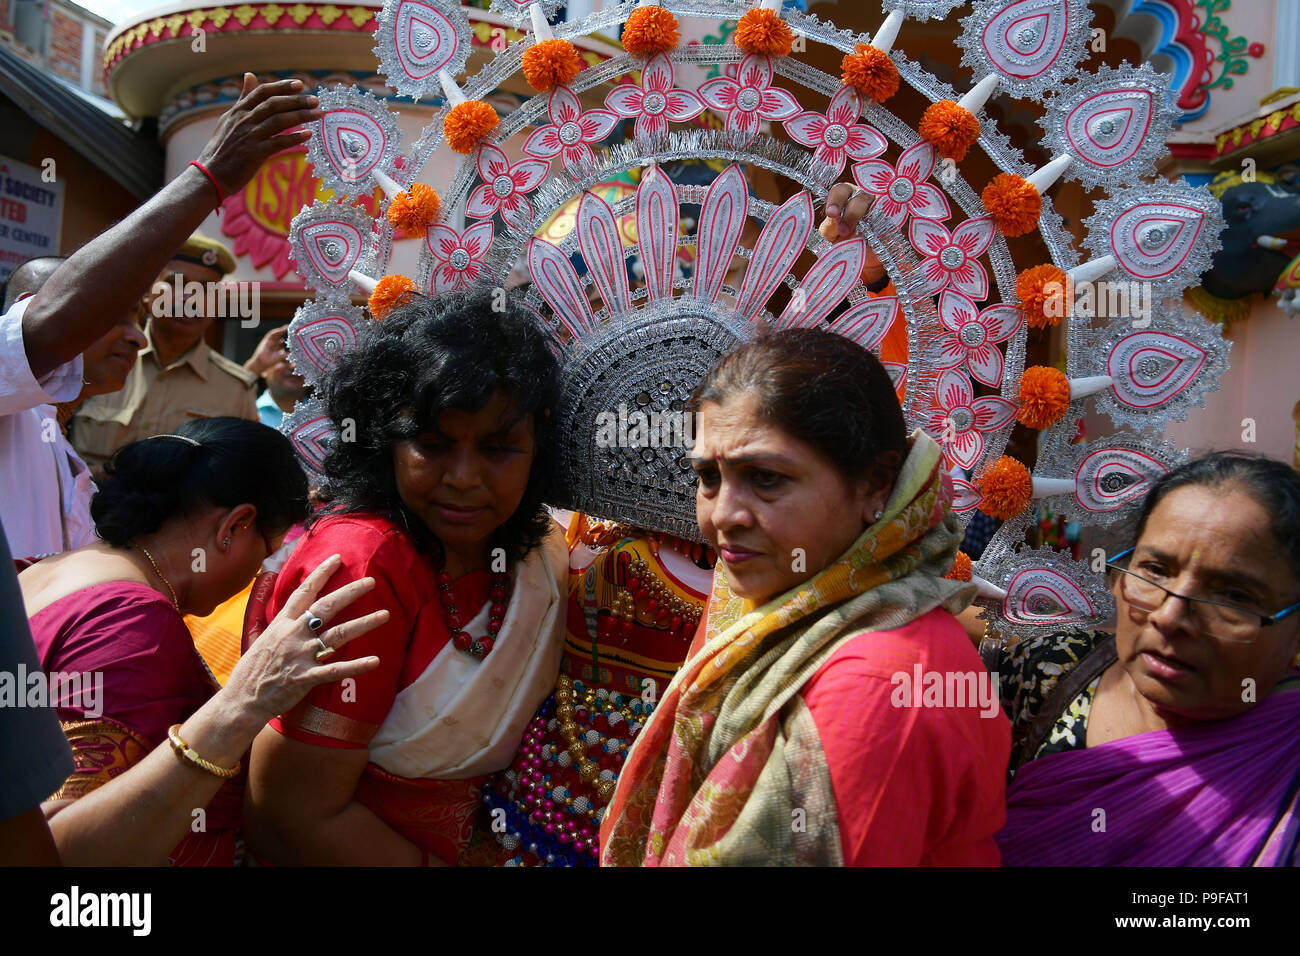 July 14, 2018 - Agartala, Tripura, India - Hindu women seen carrying the idol during the celebrations..Rath Yatra is an annual festival that involves devotees pulling a chariot of lord Jagannatha, his brother Balabhadra and sister Subhadra. (Credit Image: © Abhisek Saha/SOPA Images via ZUMA Wire) Stock Photo